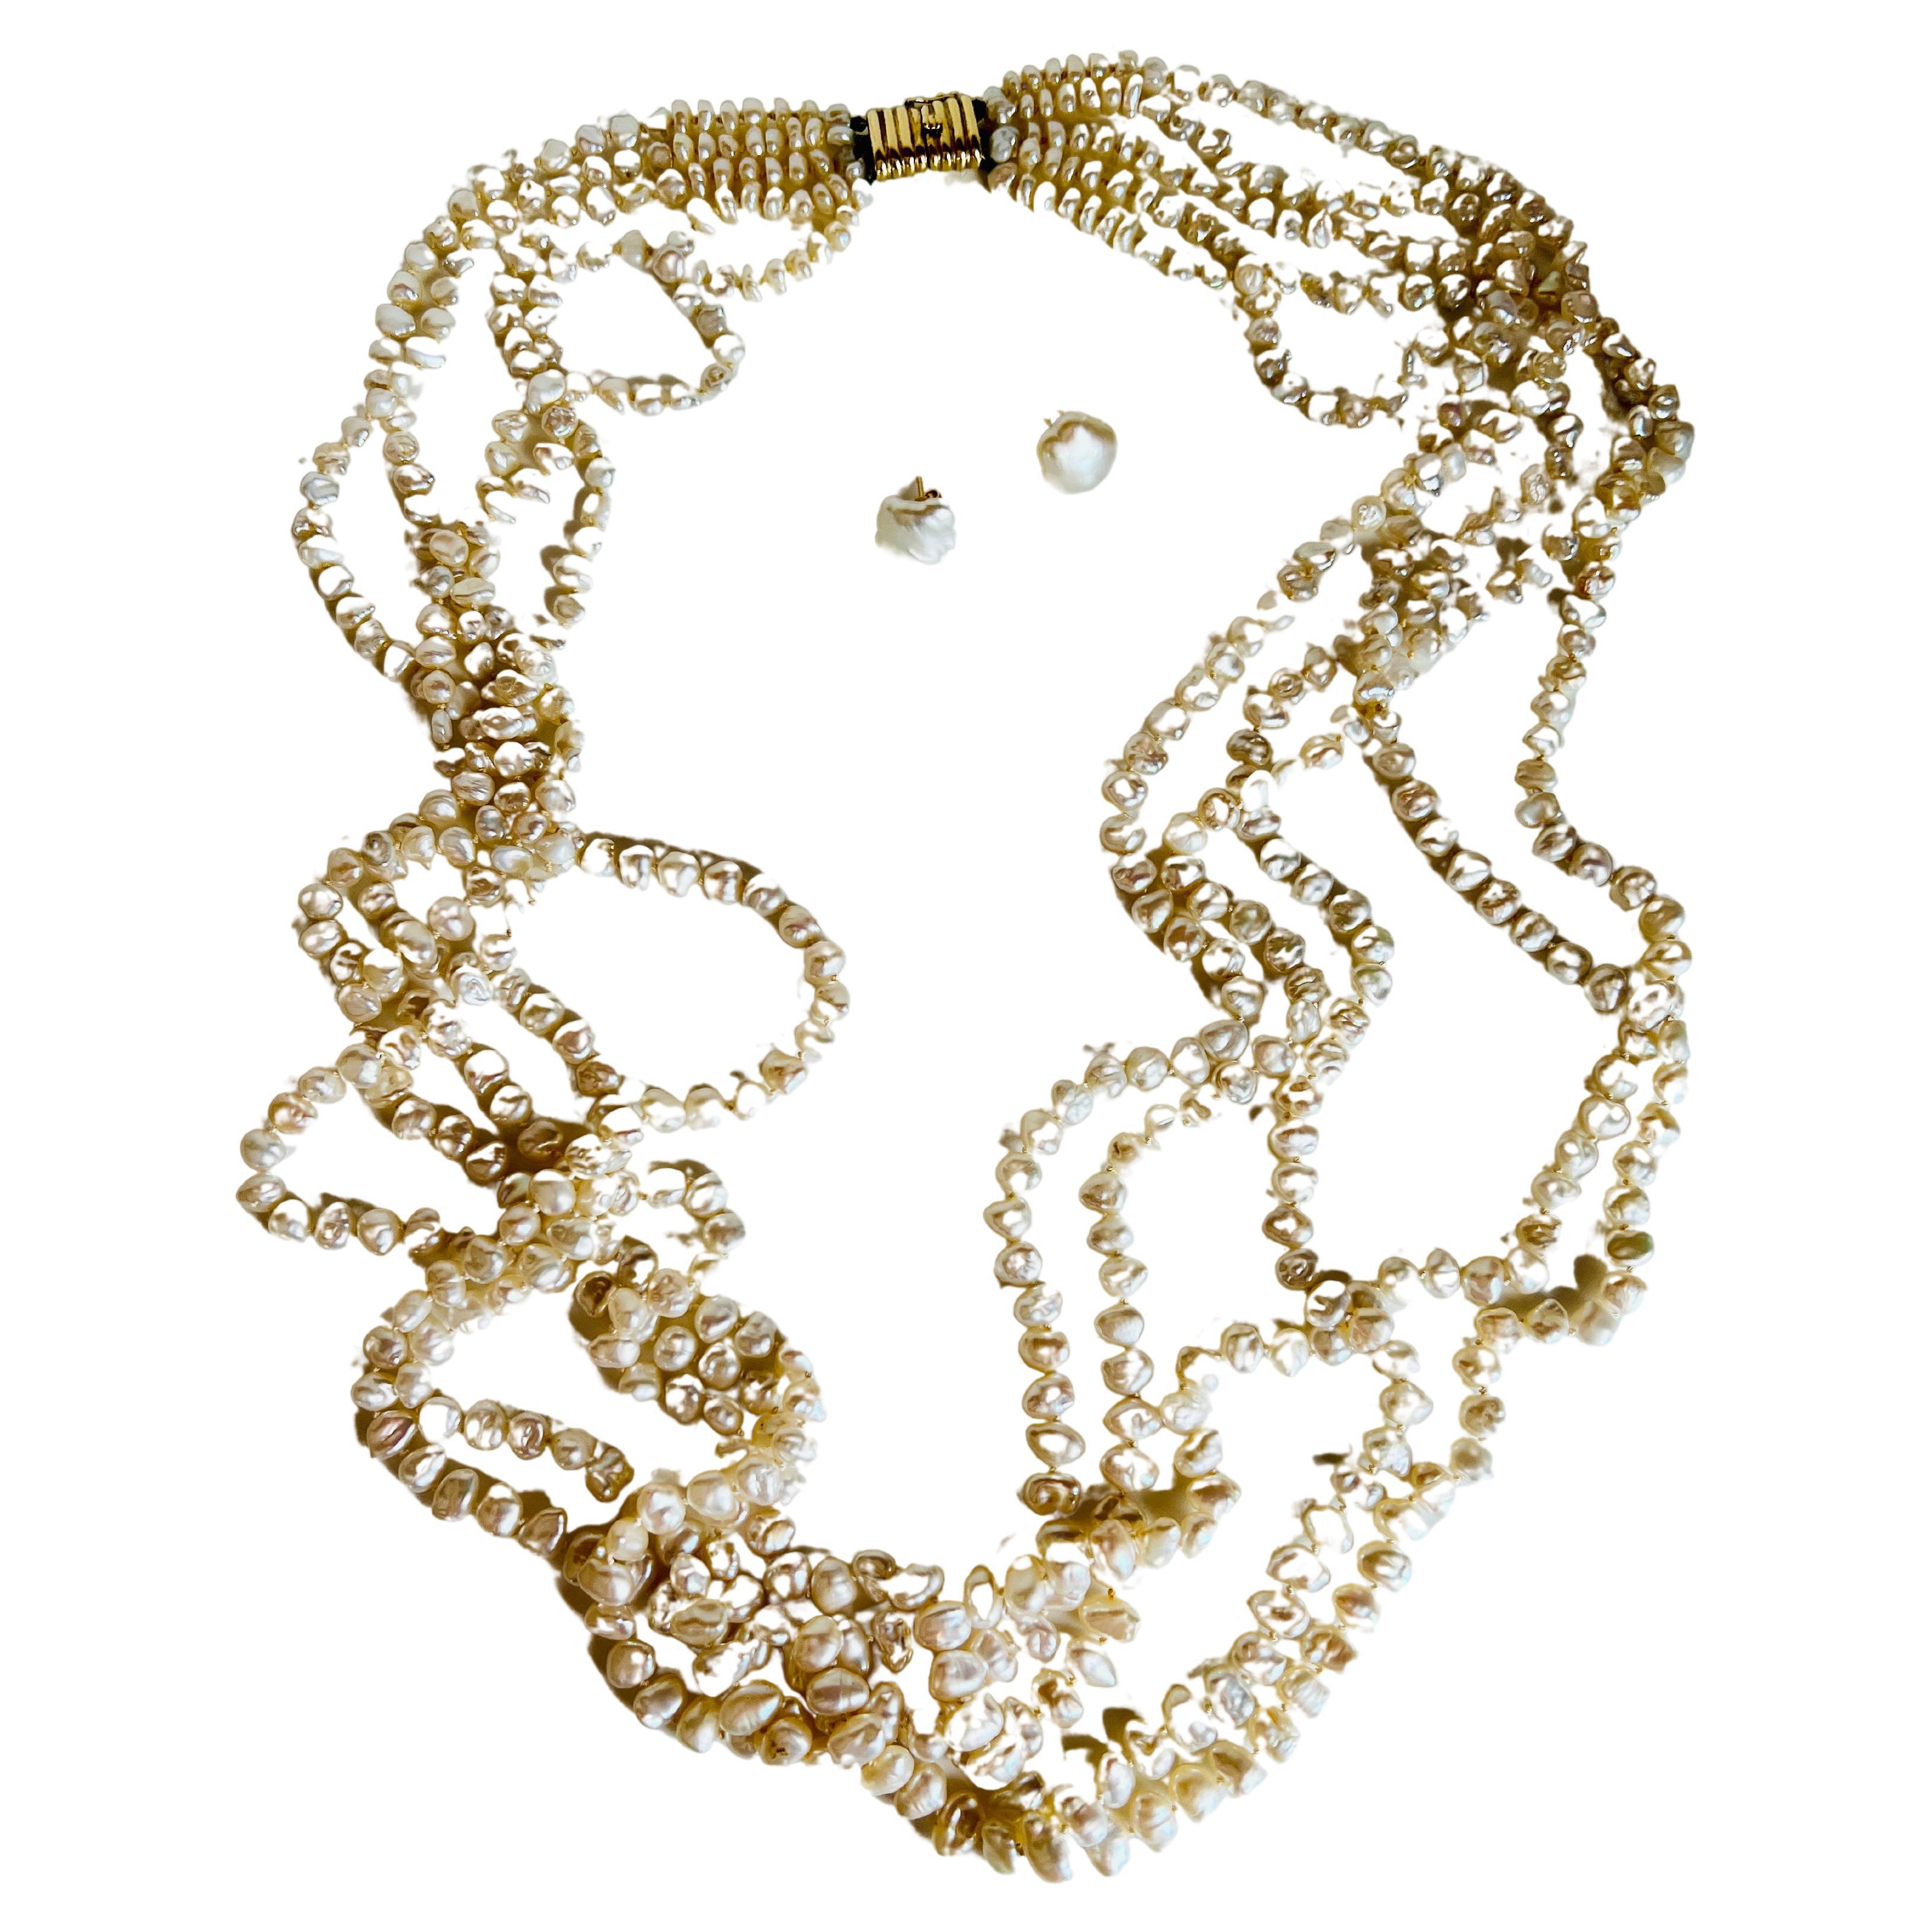 Elevate your collection with this 14k yellow gold cultured pearl necklace and earring set. The torsade necklace is composed of five strands of numerous Keishi freshwater cultured pearls adding a touch of haute couture and runway glamour, making it